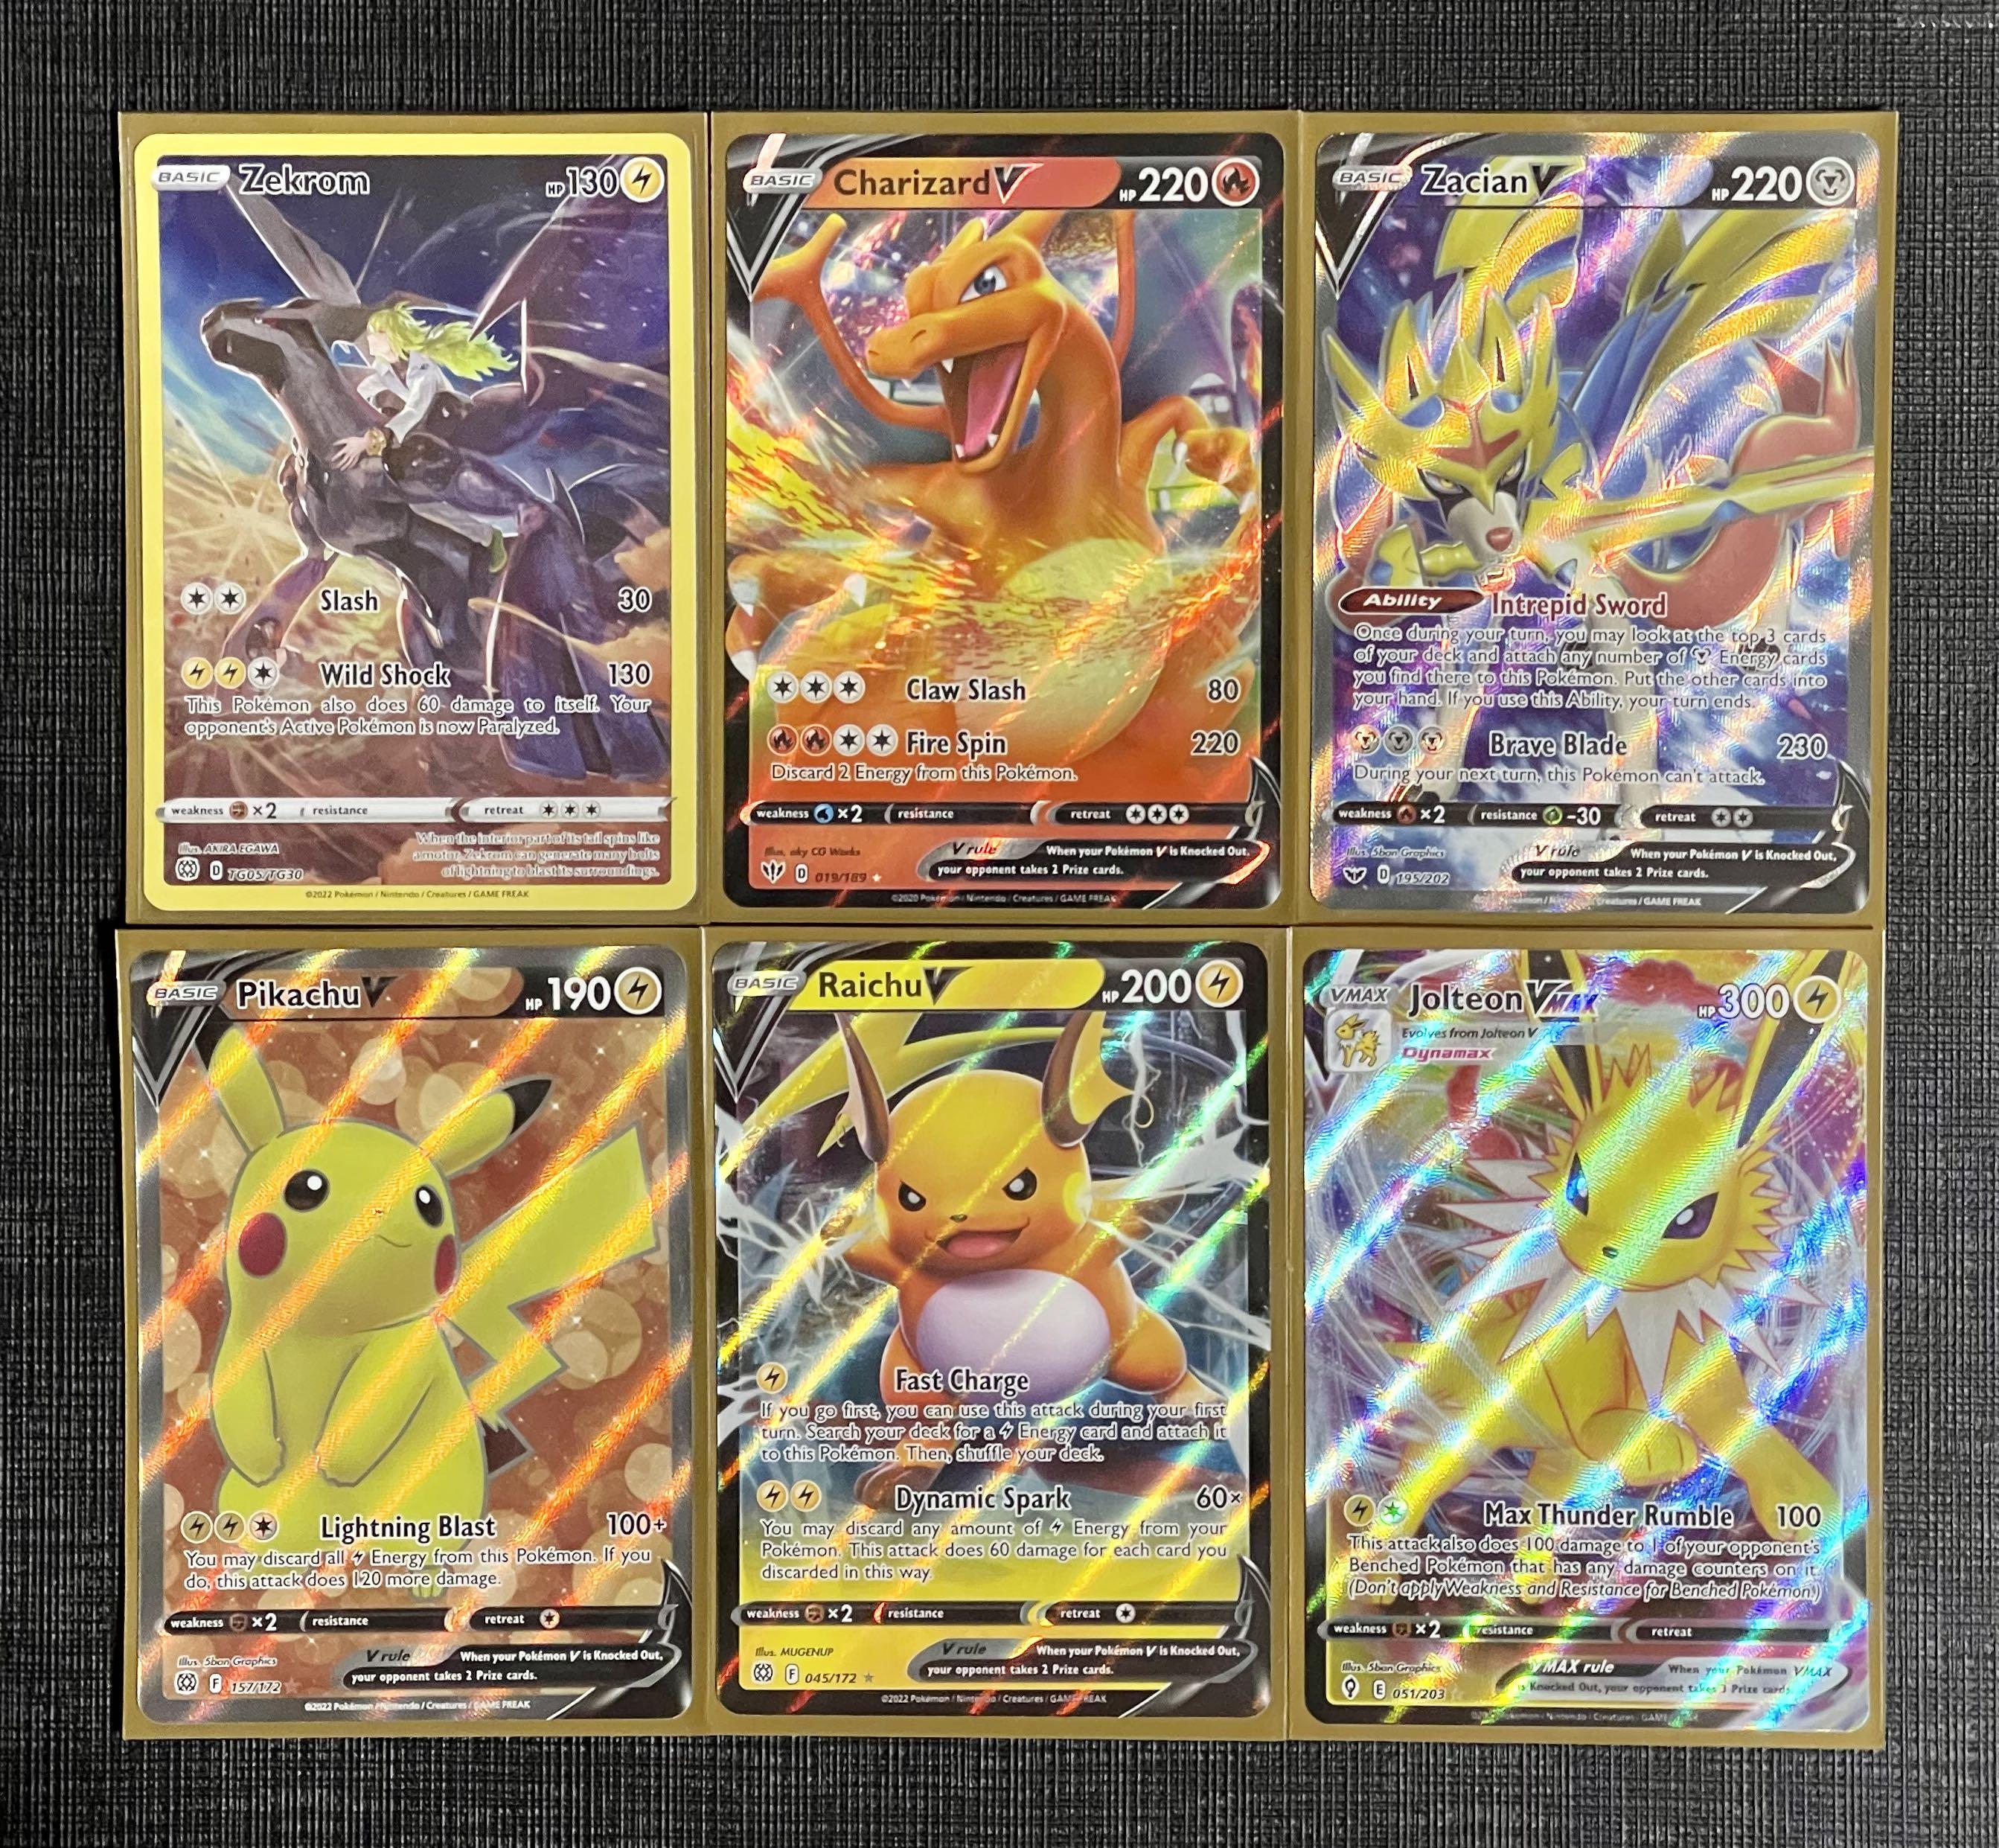 Pulled Talonflame V and Reshiram & Zekrom GX full art from an Aldi